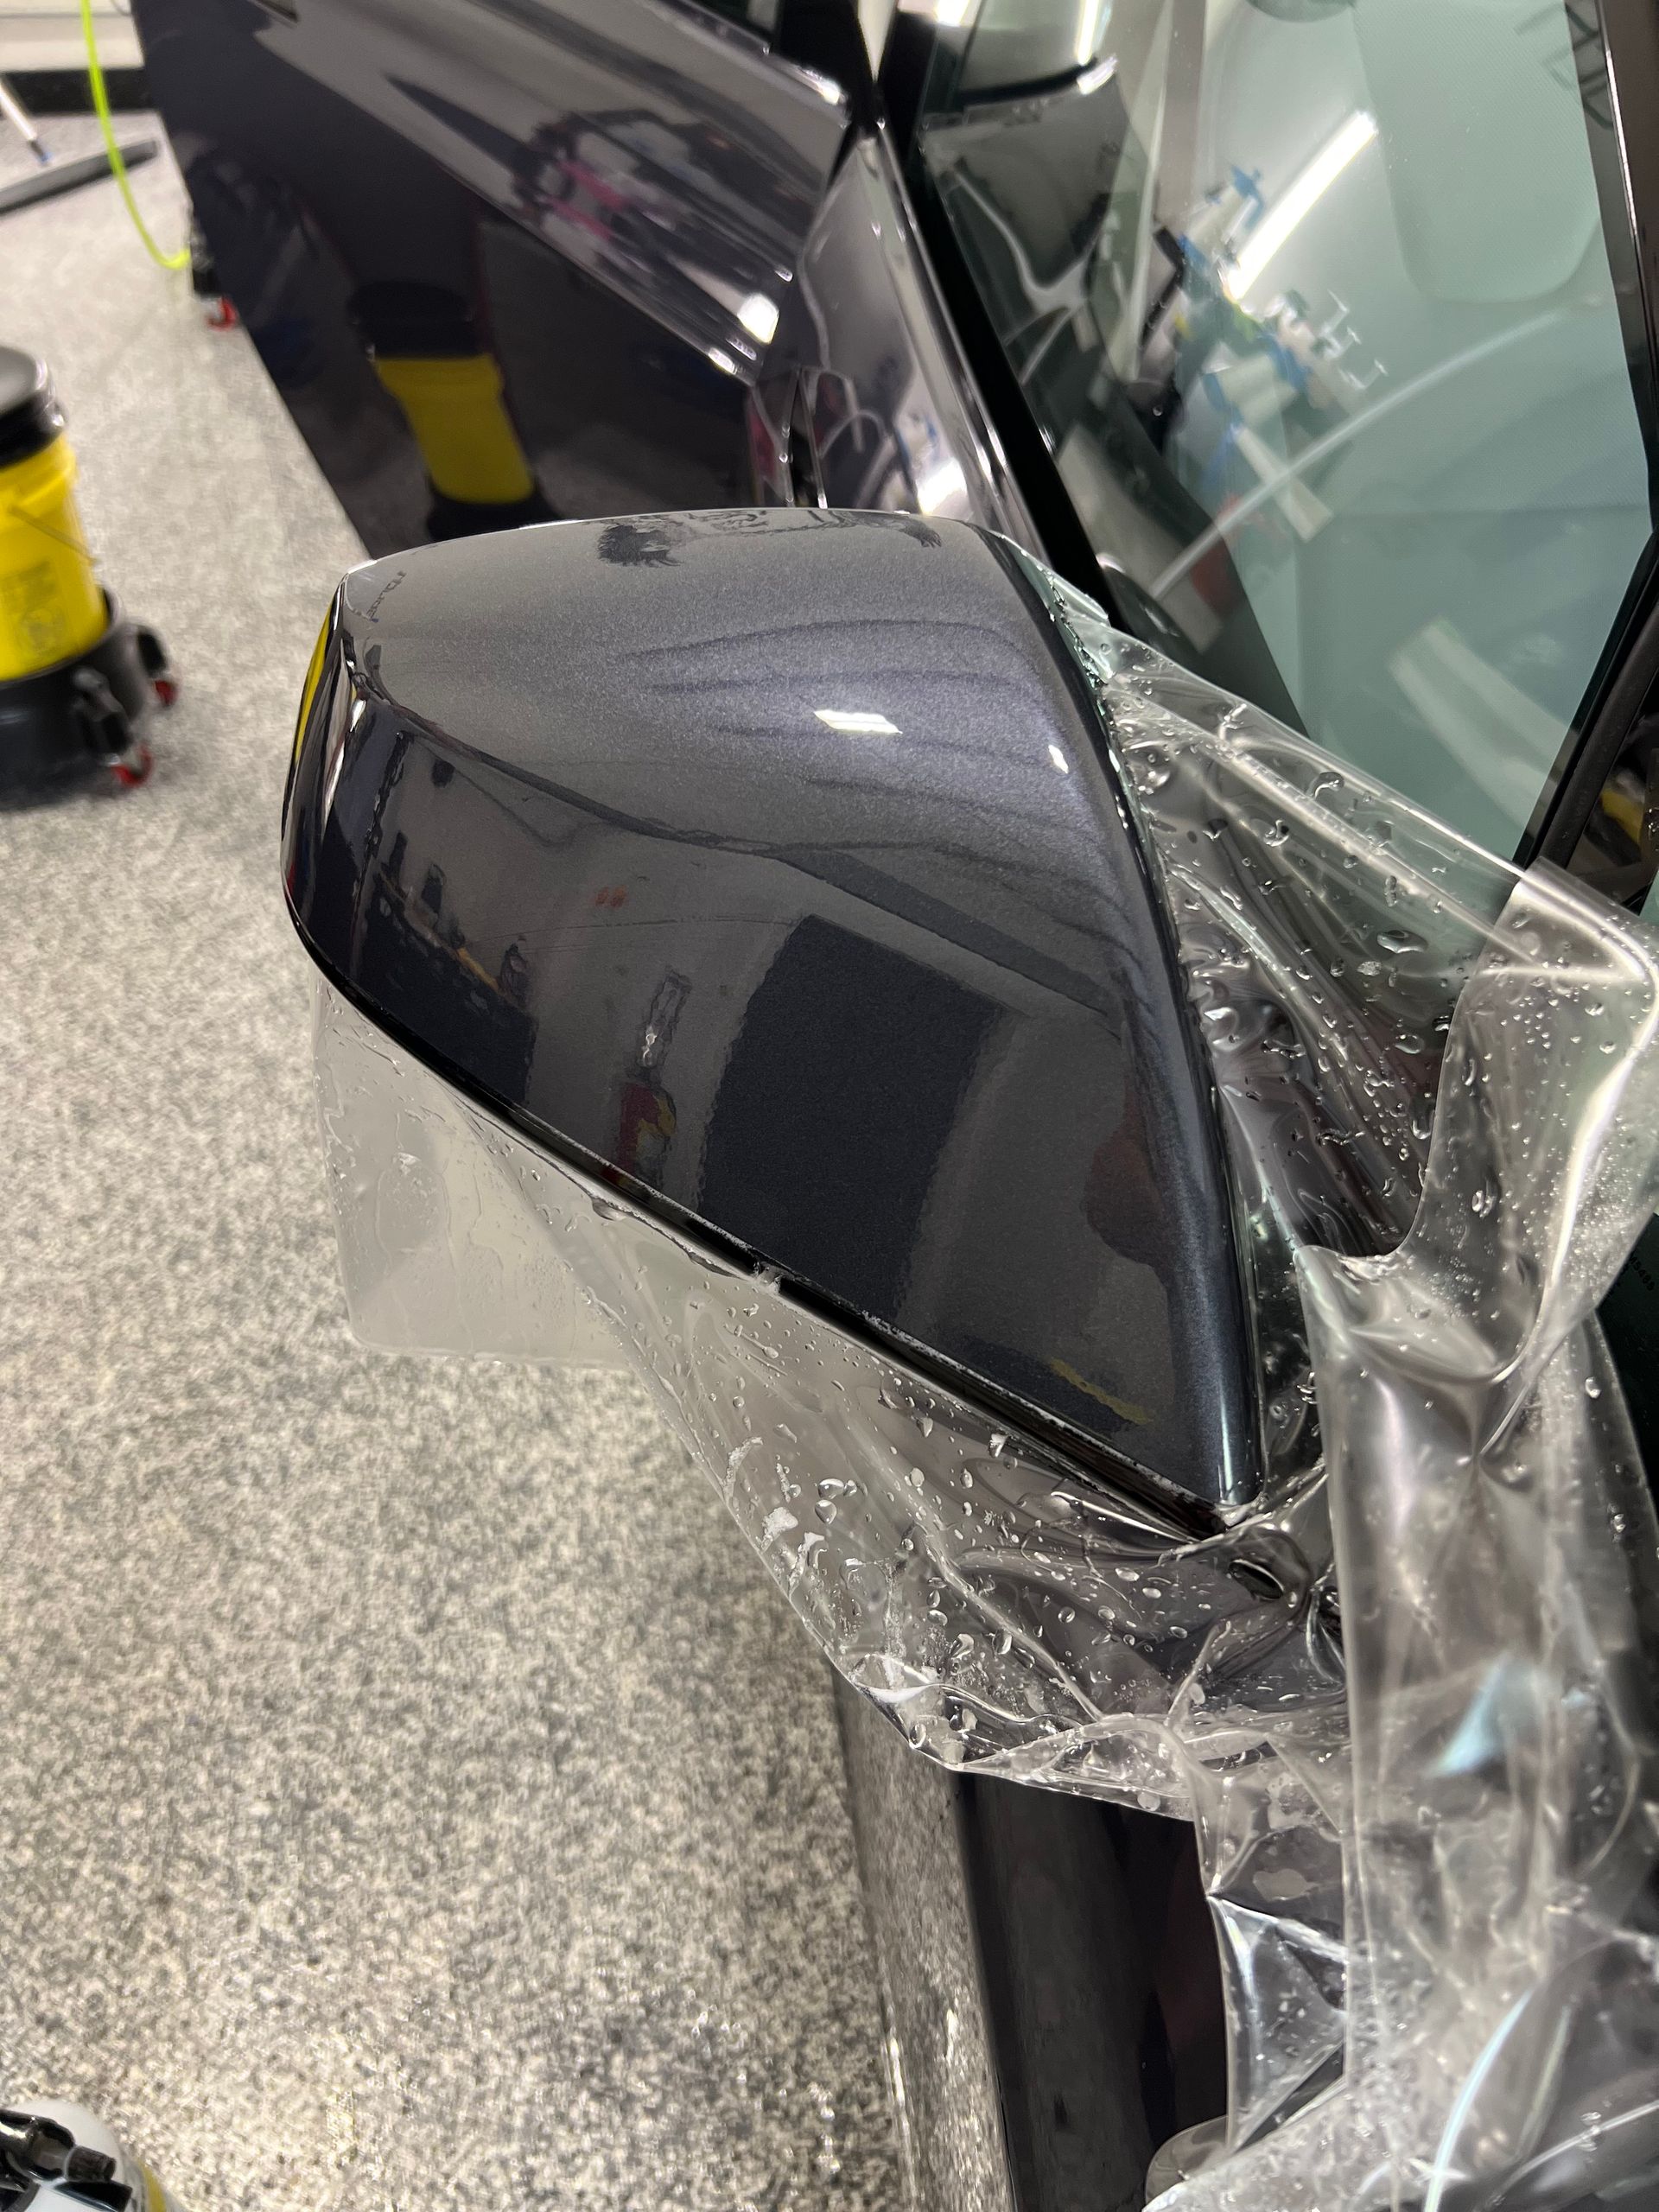 Paint Protection Film (PPF) installation